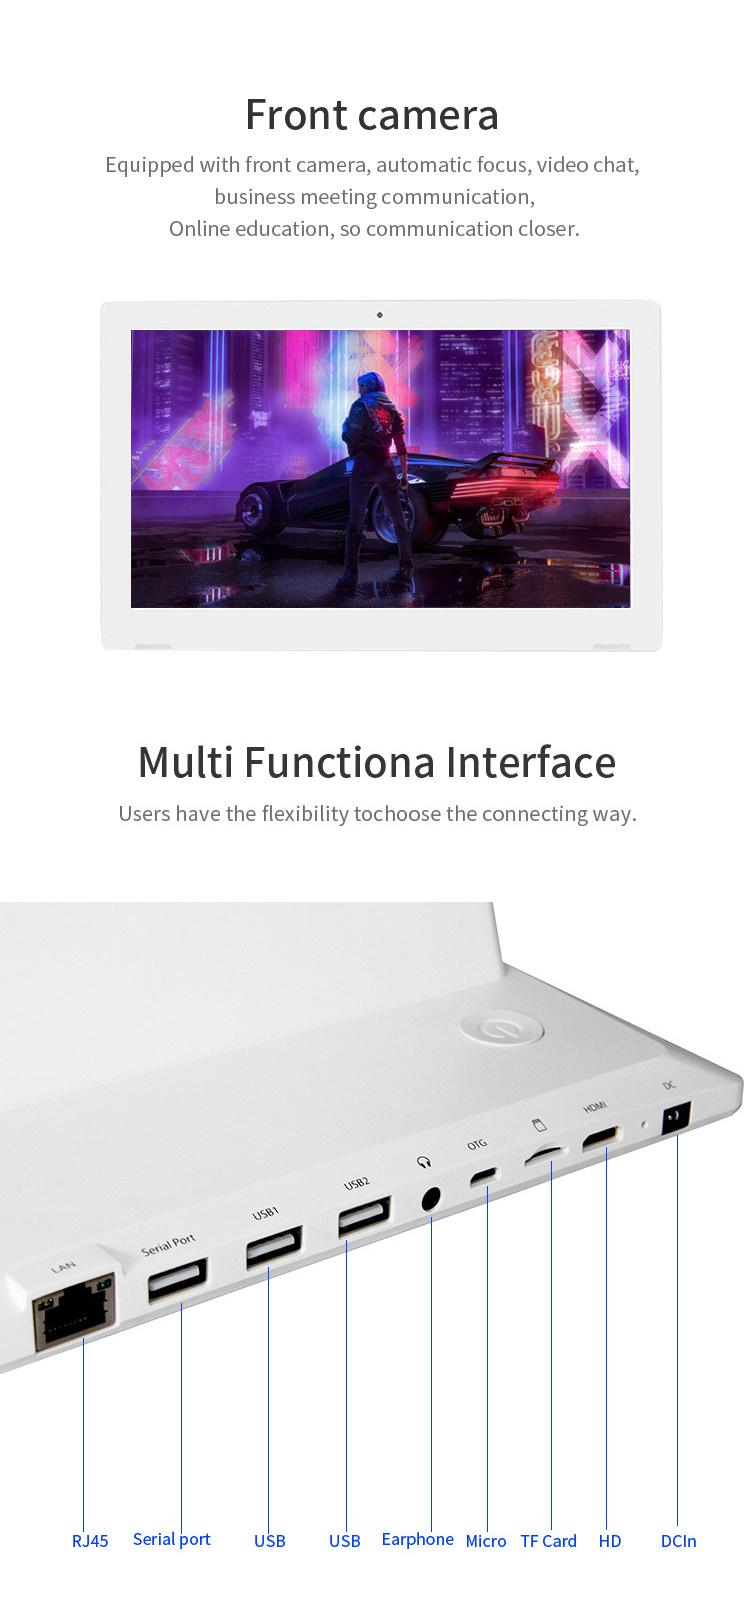 Multi Functional Interface 17 Inch Android Tablet with WiFi